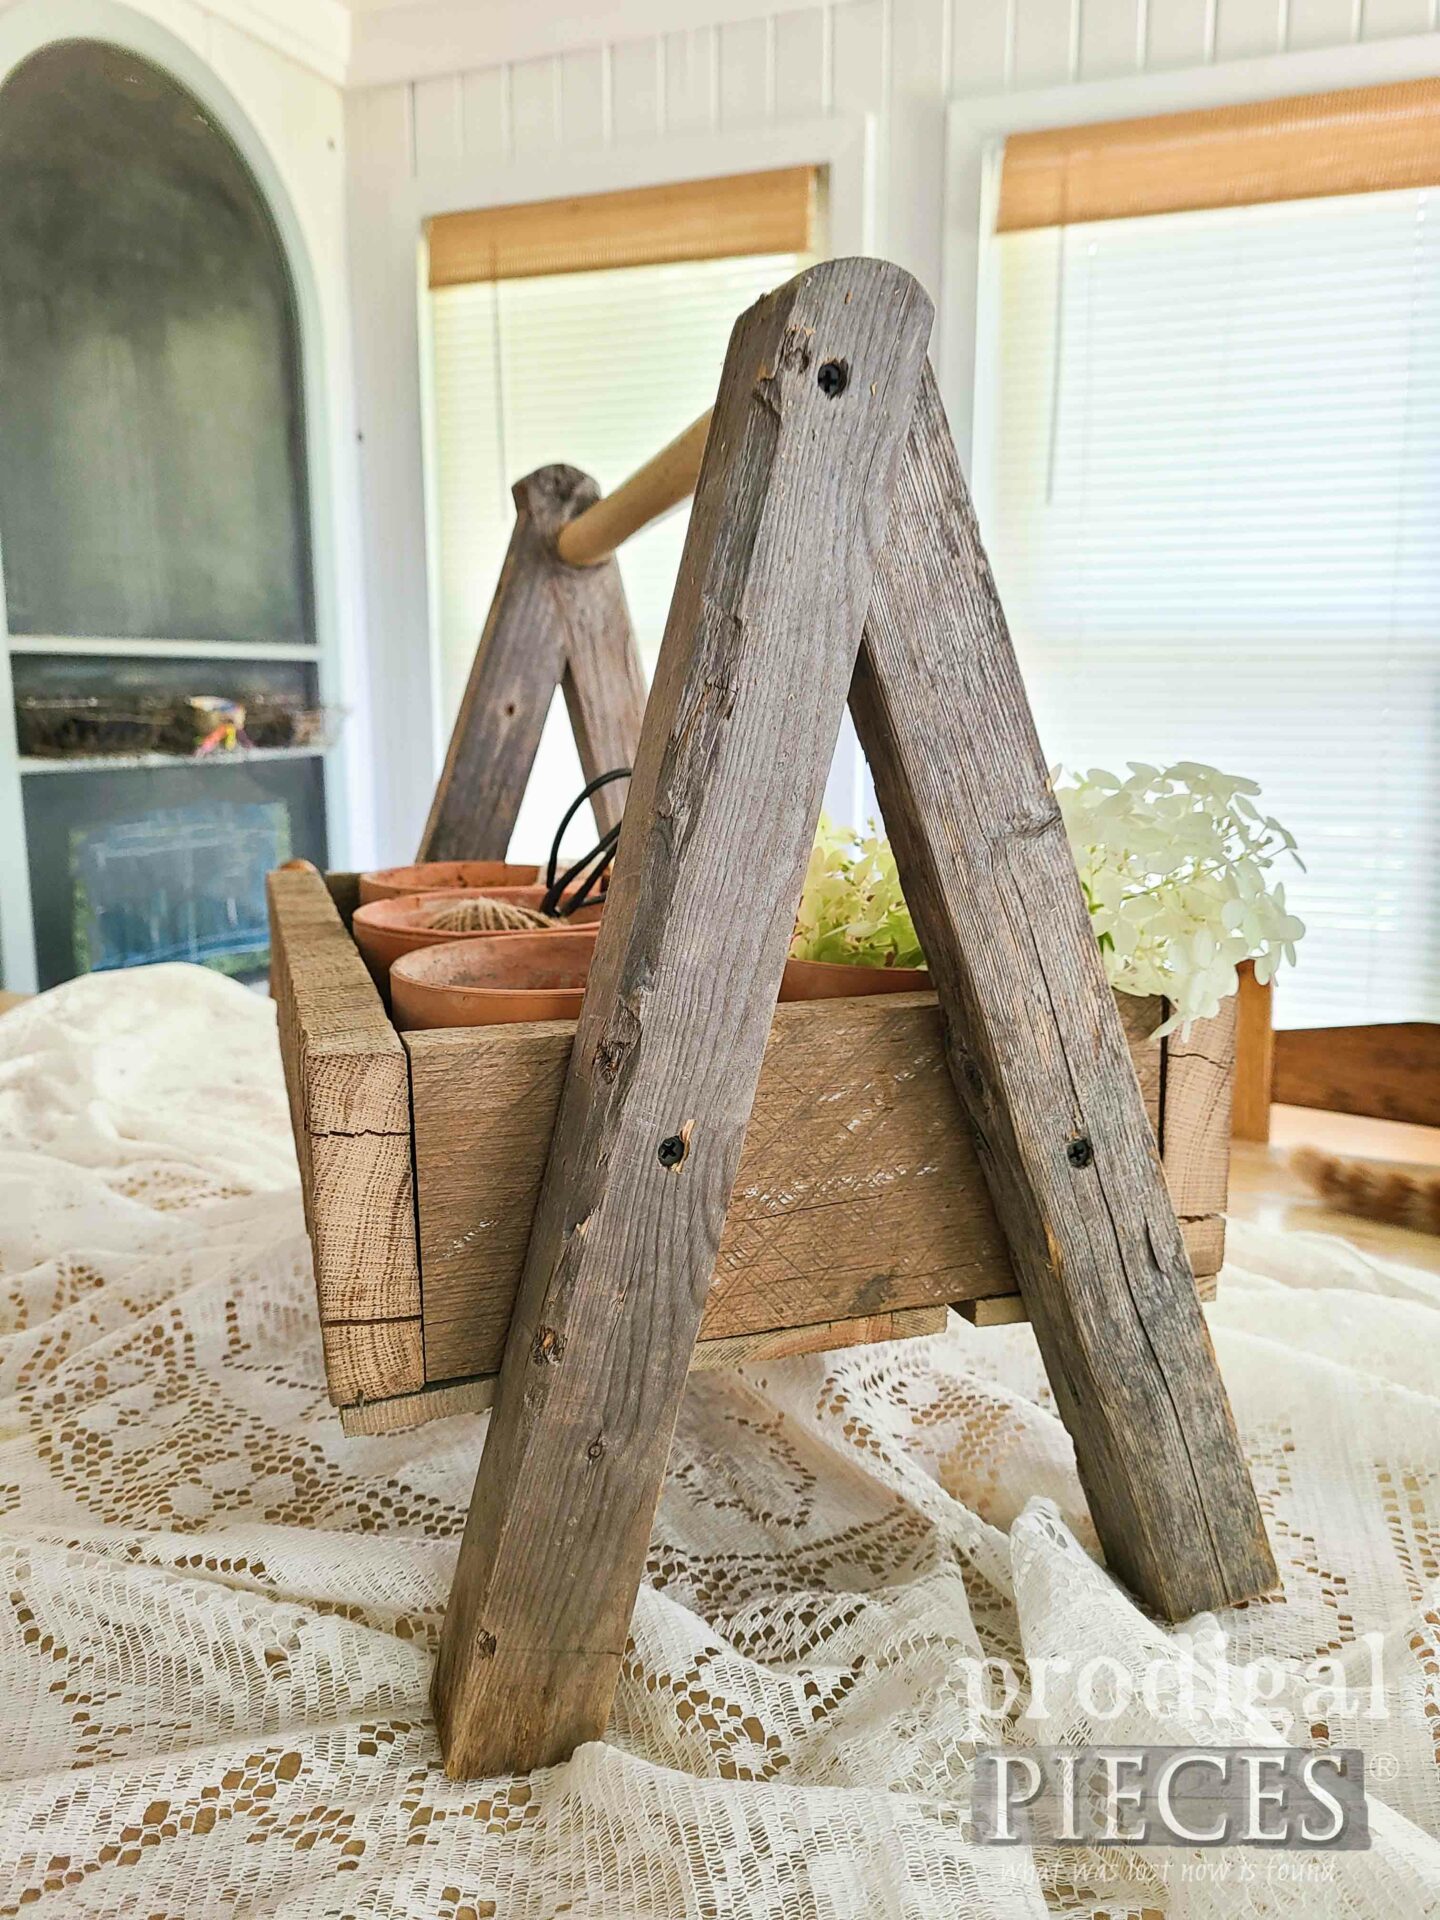 A-Frame DIY Reclaimed Wood Tote by Larissa of Prodigal Pieces | prodigalpieces.com #prodigalpieces